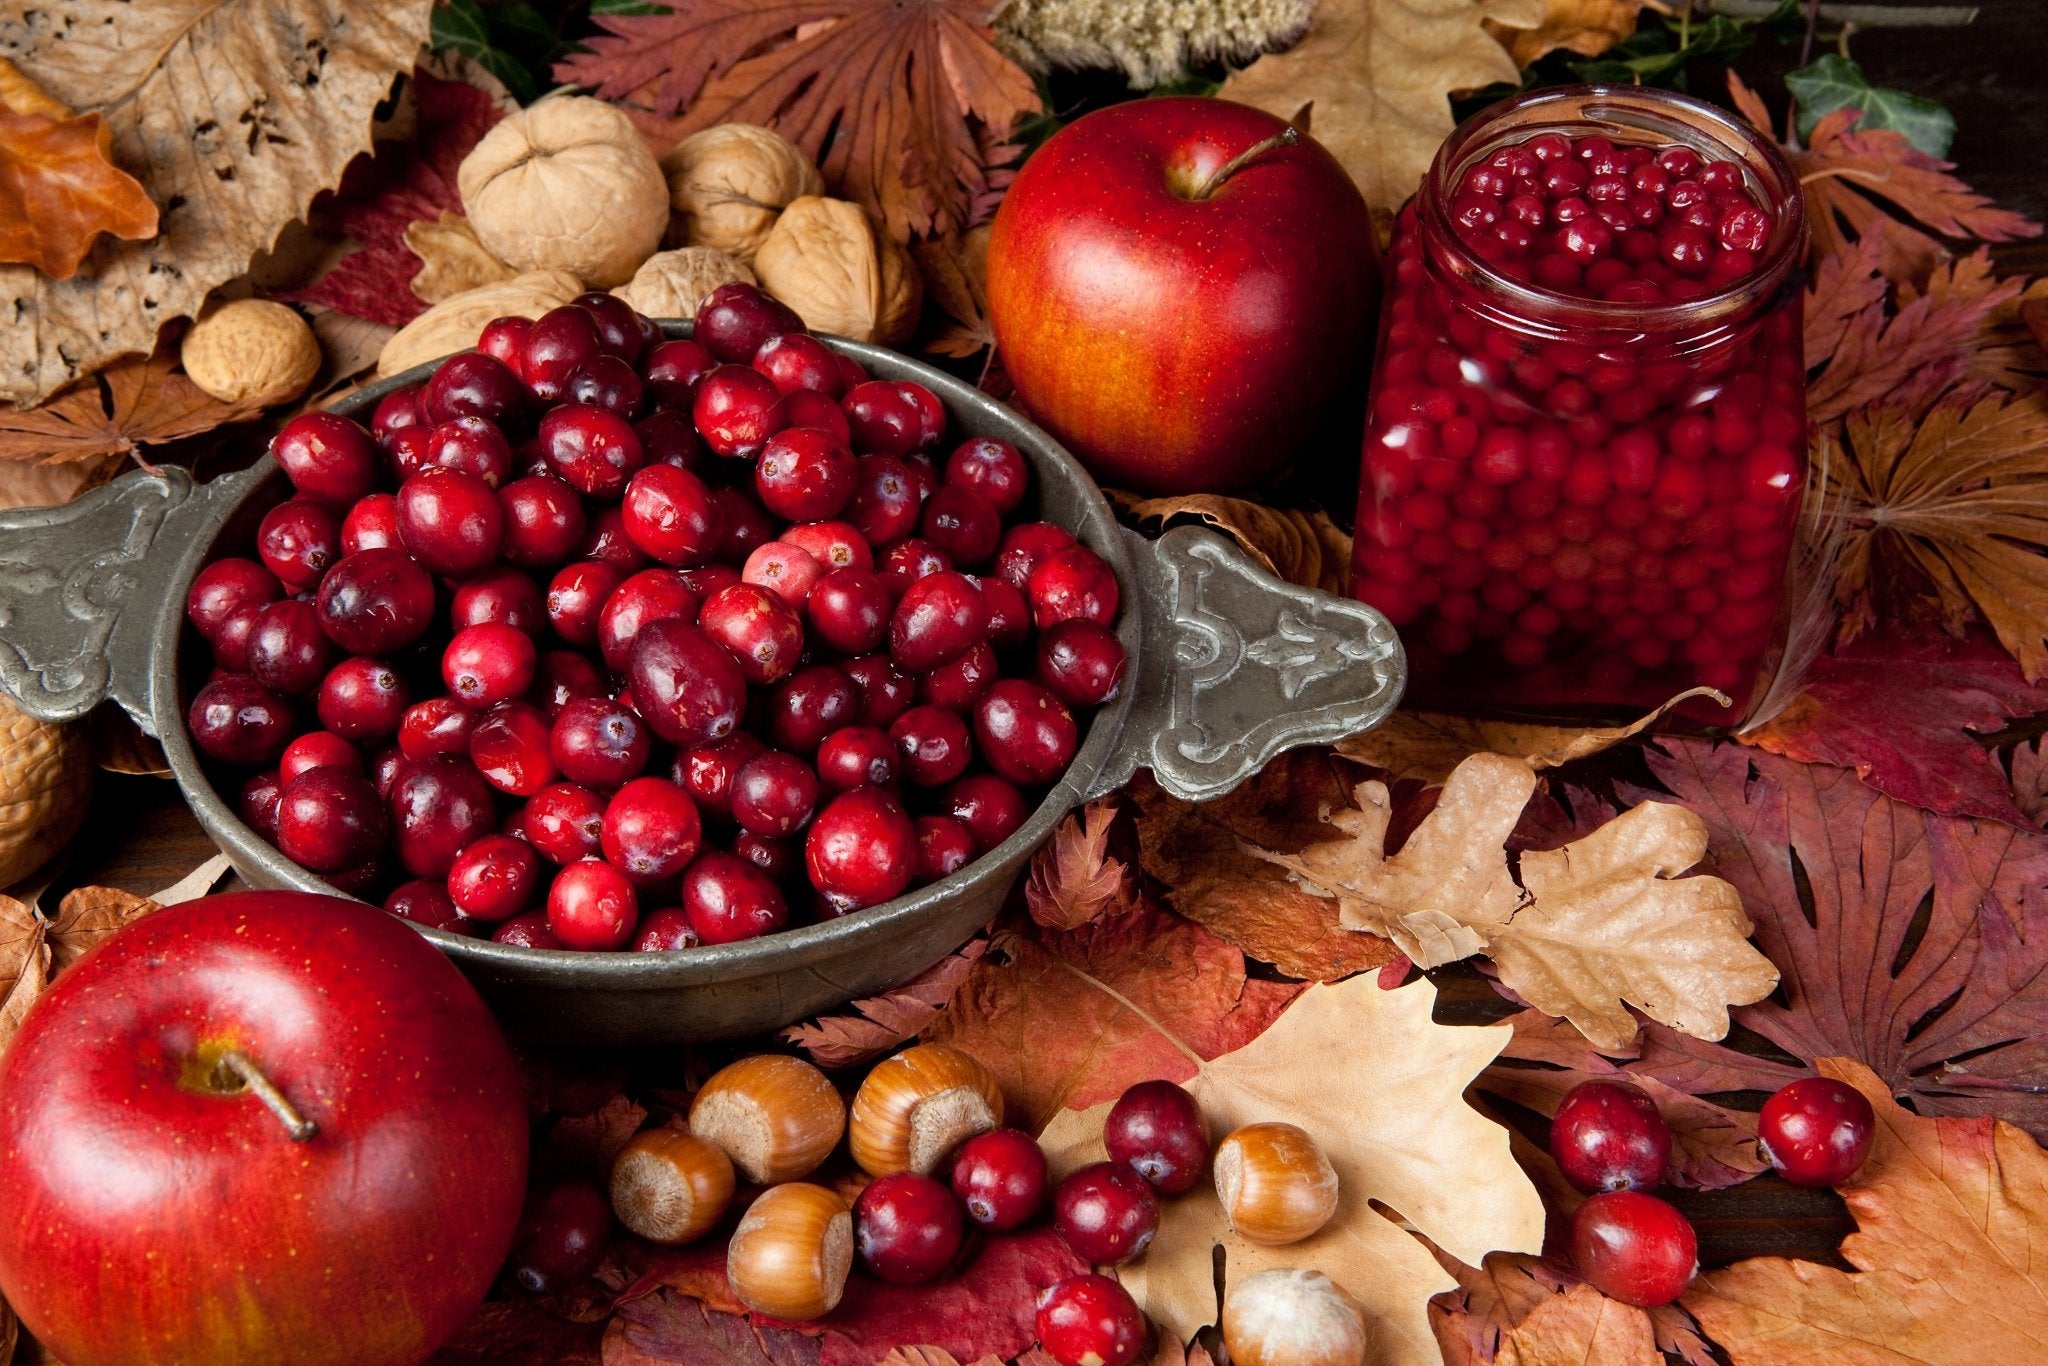 Is It Safe for Dogs to Eat Cranberries?